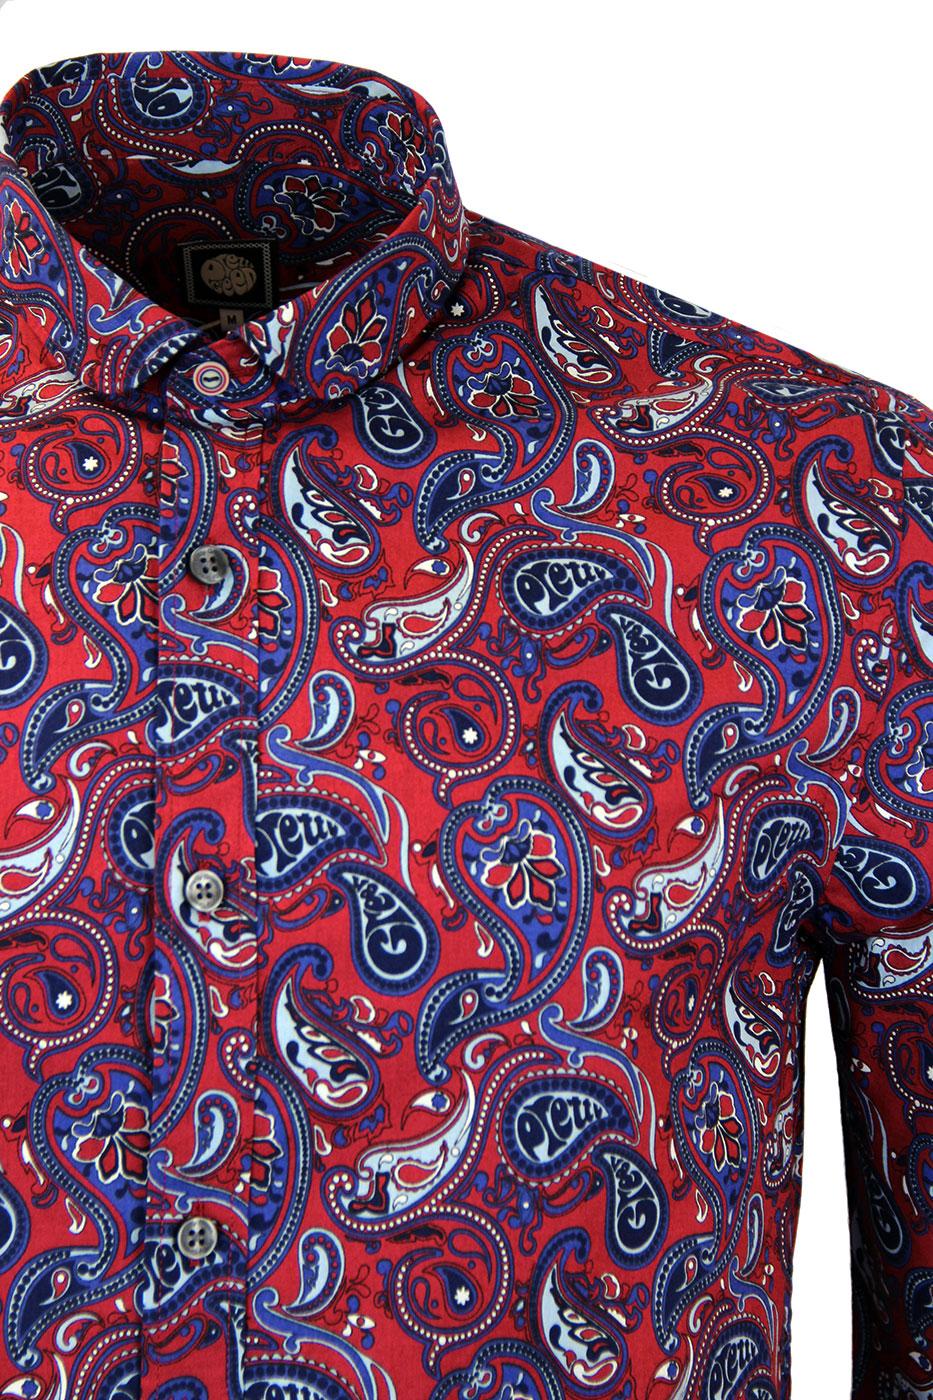 PRETTY GREEN Sefton Retro Mod Psychedelic Paisley Shirt in Red